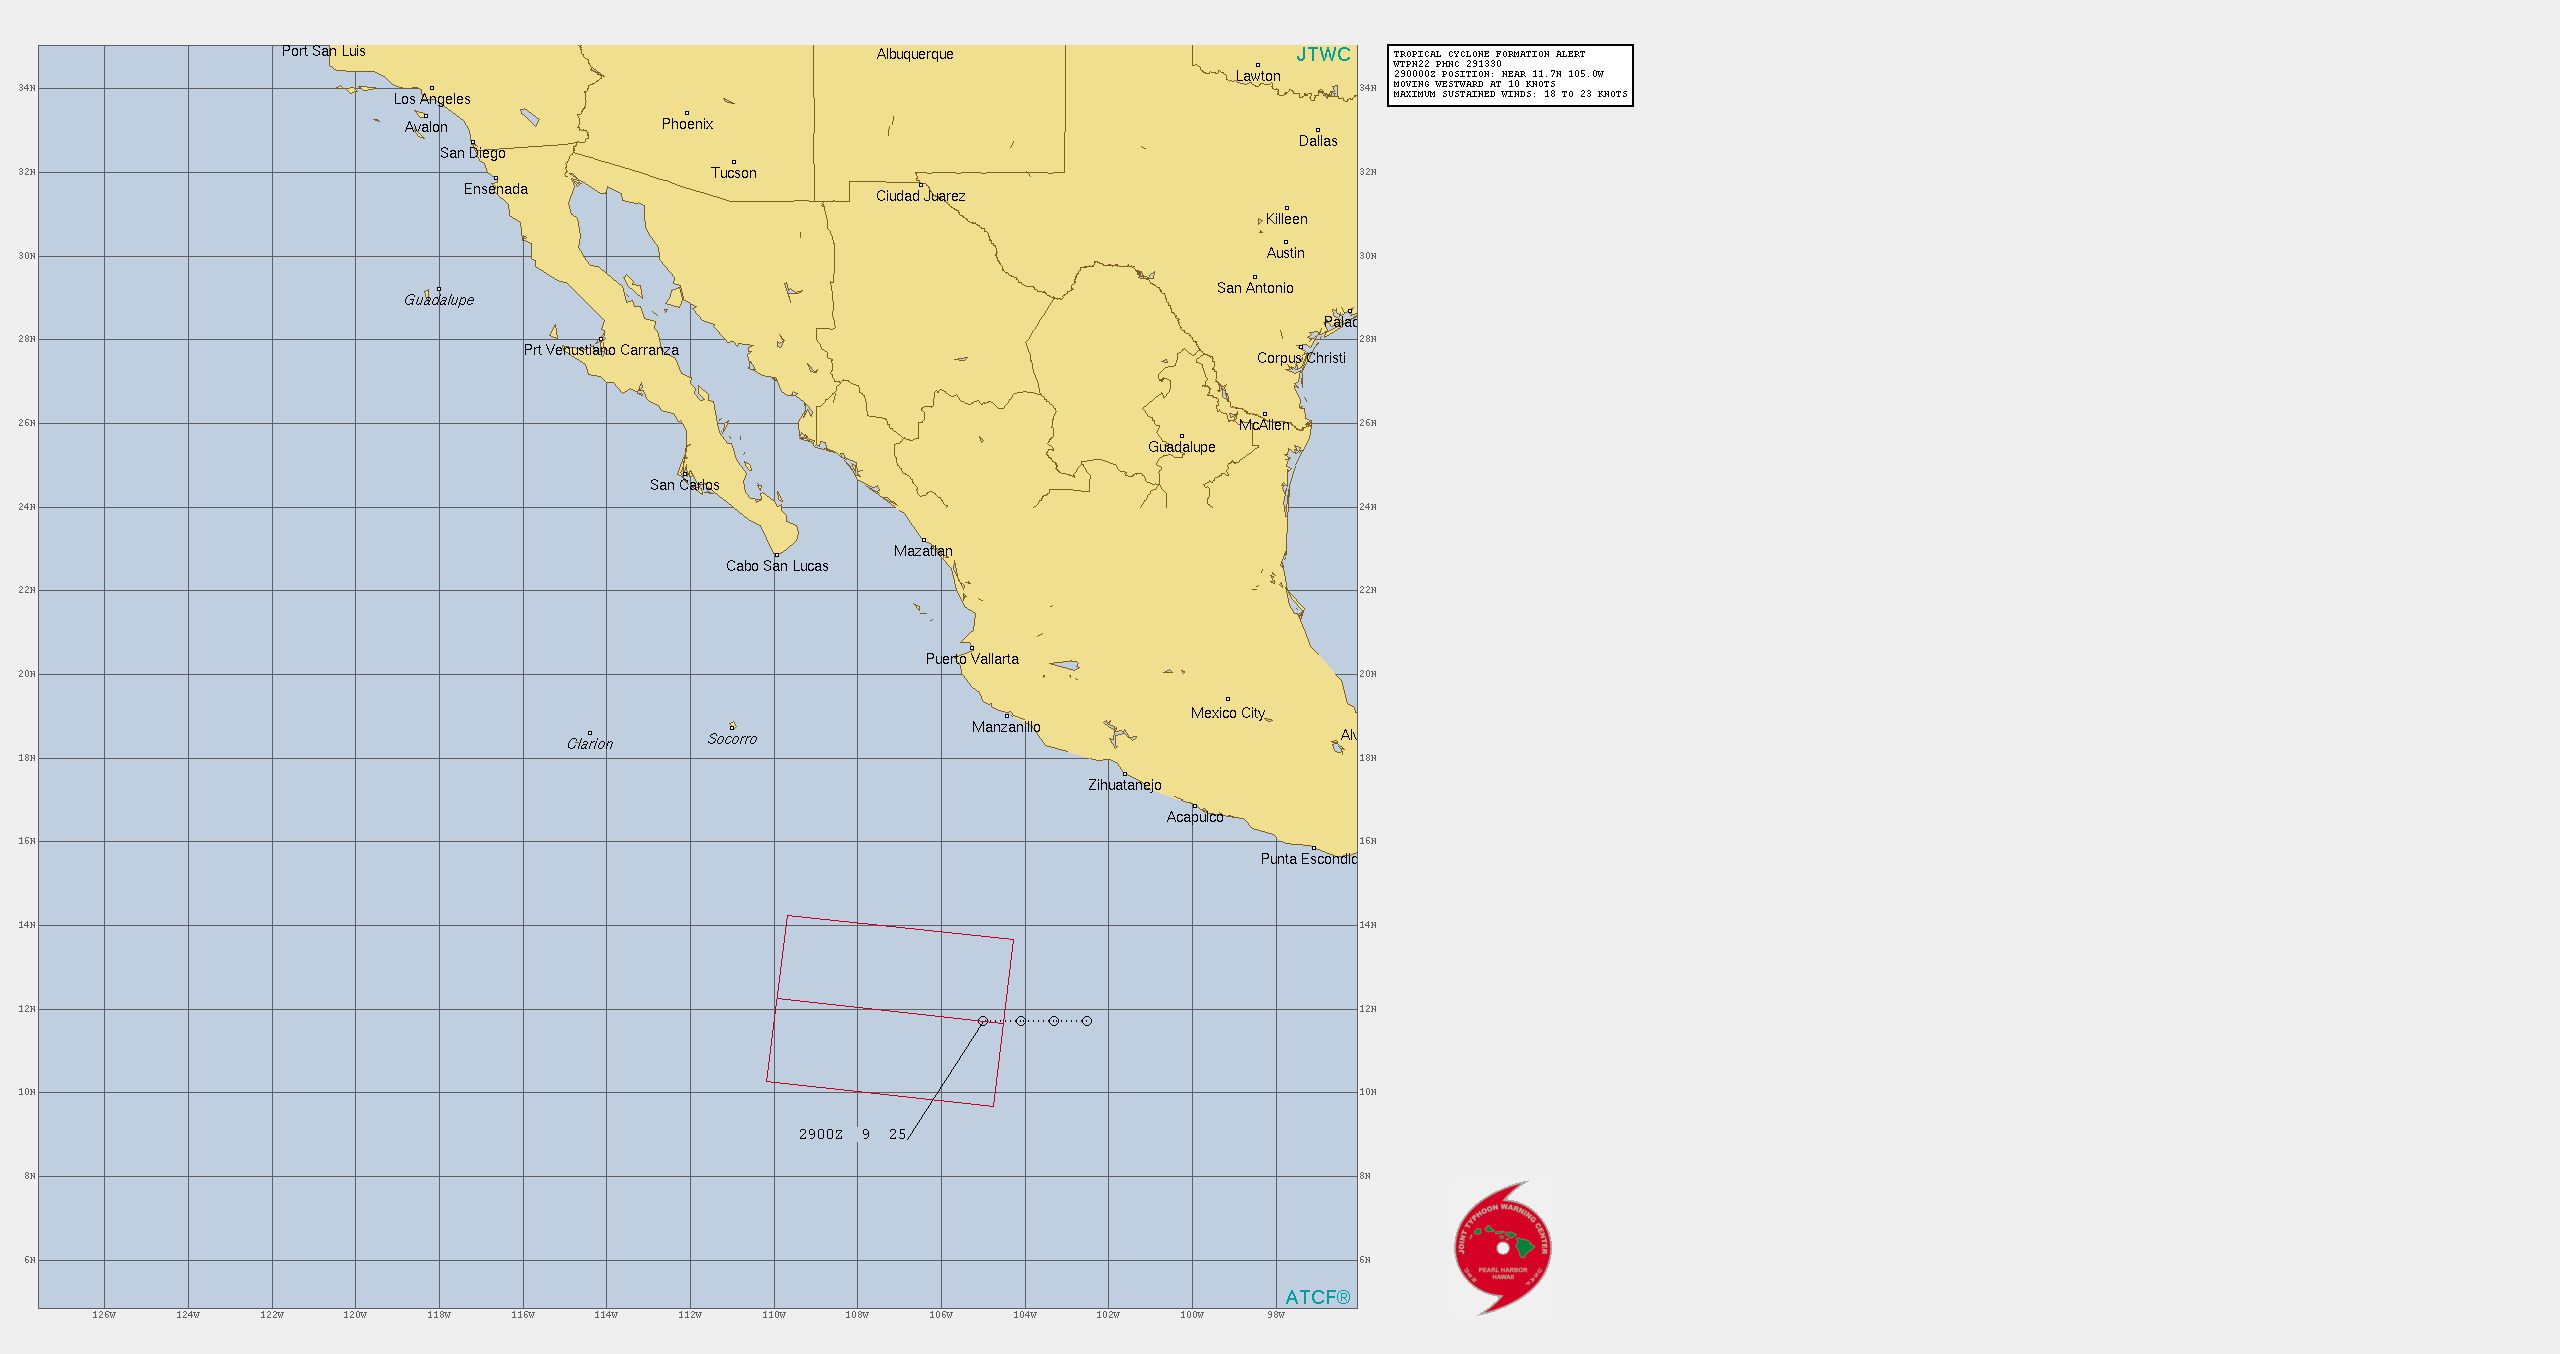 INVEST 90E. TROPICAL CYCLONE FORMATION ALERT ISSUED AT 29/1330UTC.